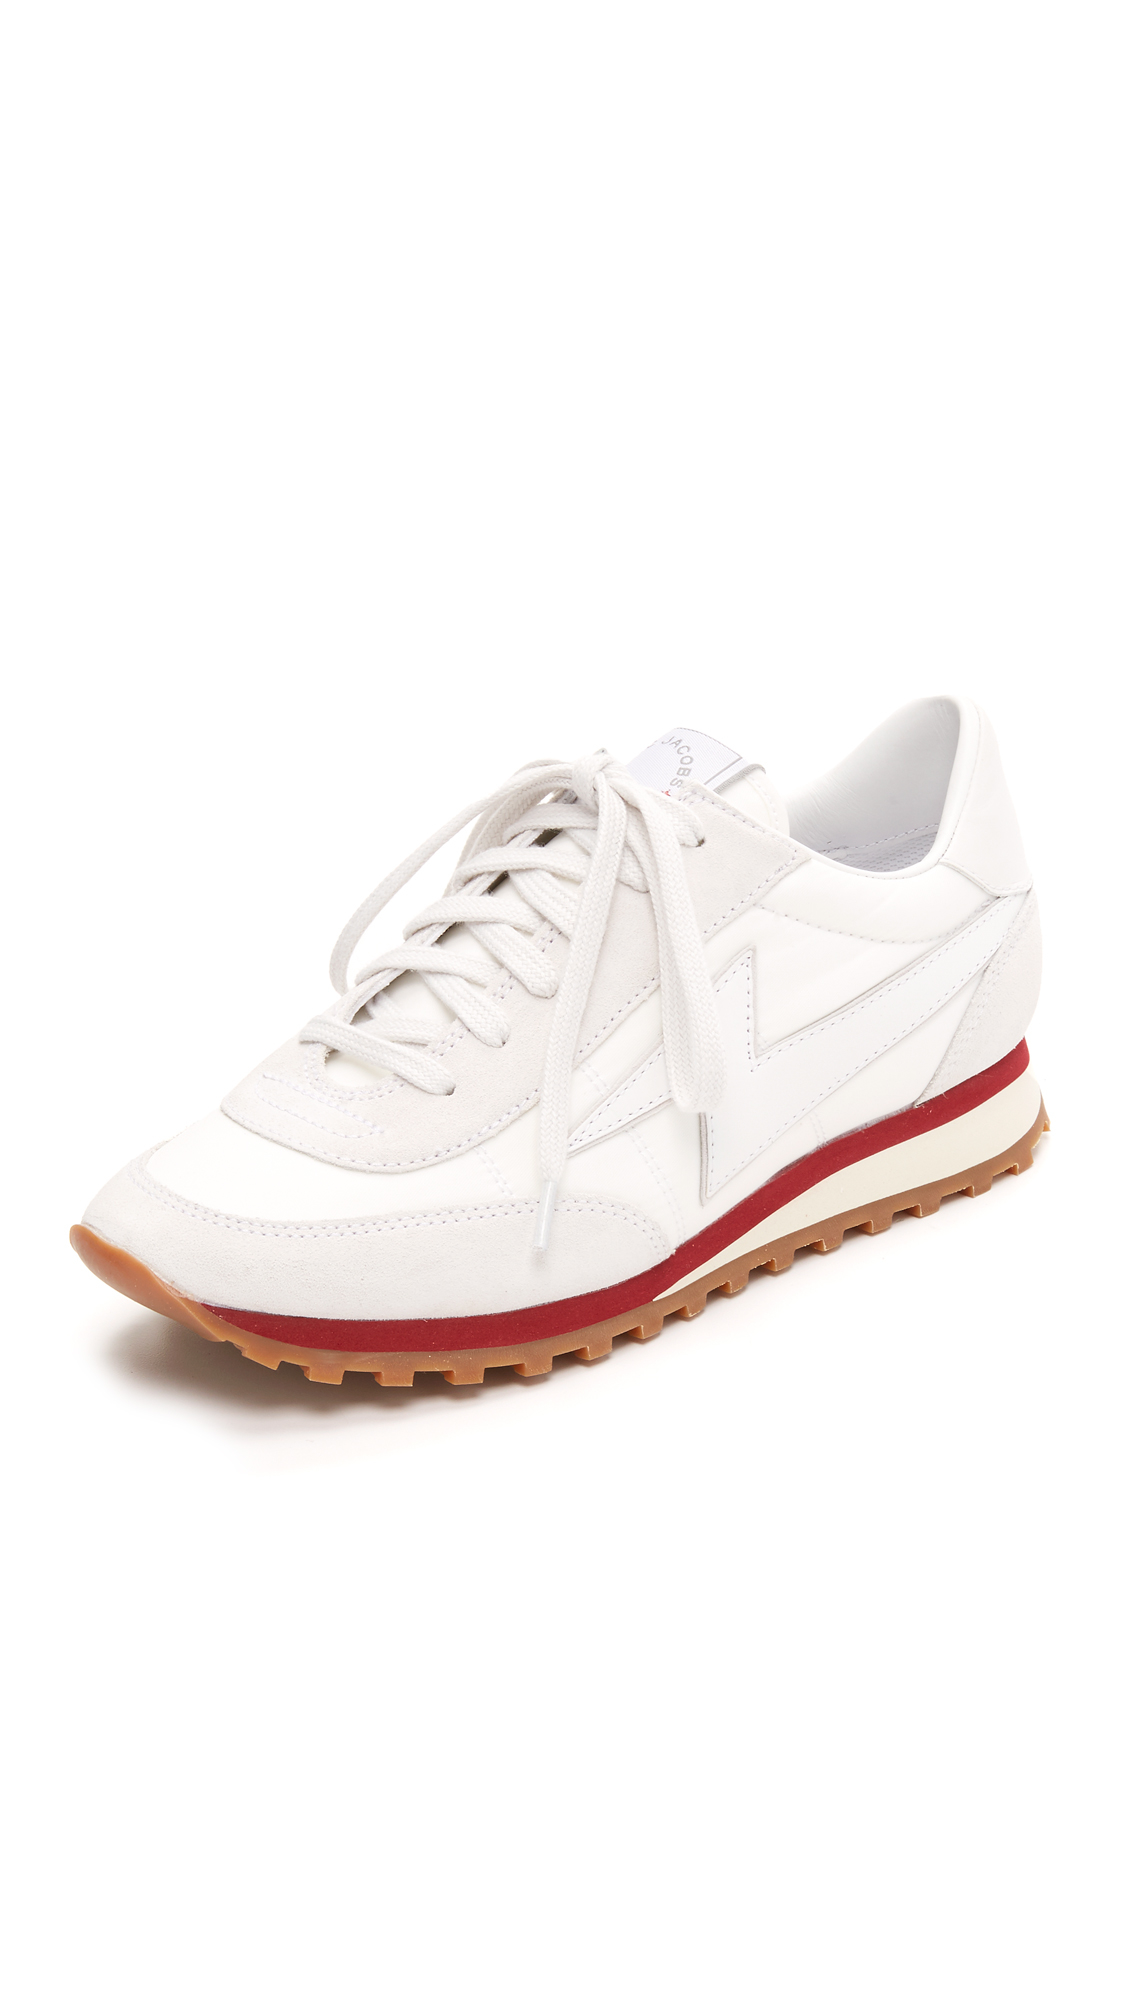 Marc Jacobs Synthetic Astor Lightning Bolt Sneakers in White - Lyst